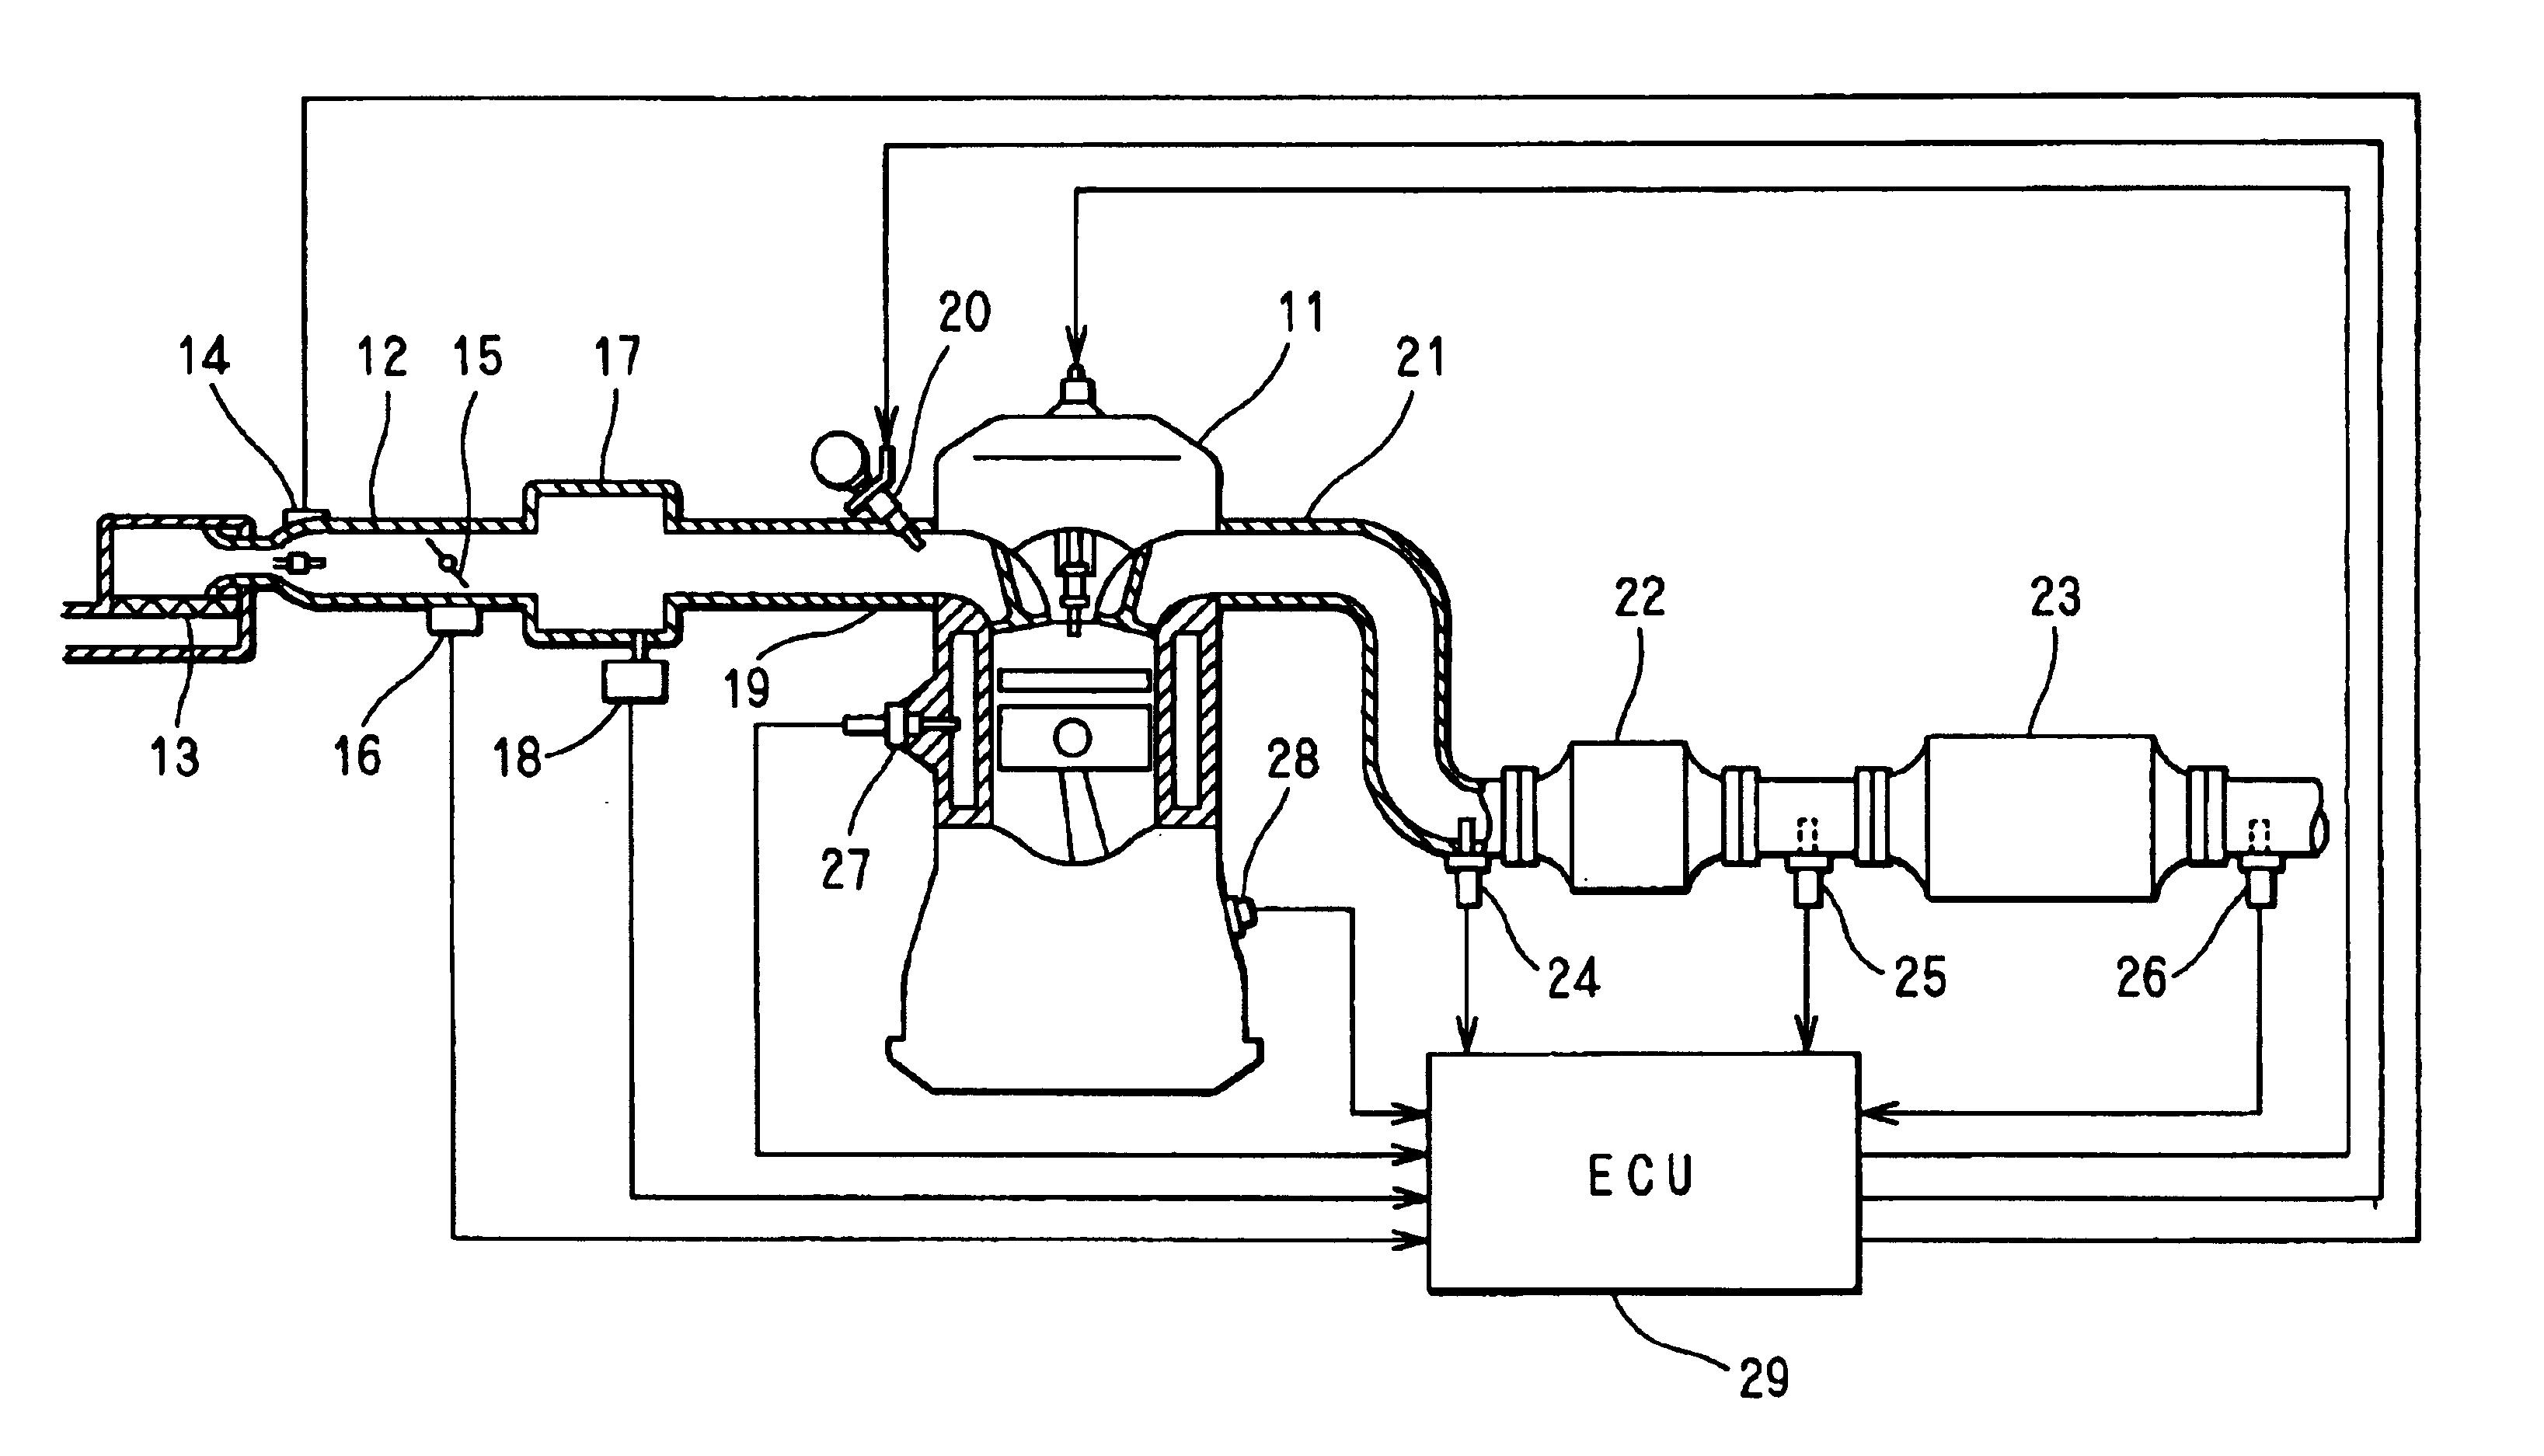 Exhaust gas purifying system for internal combustion engines